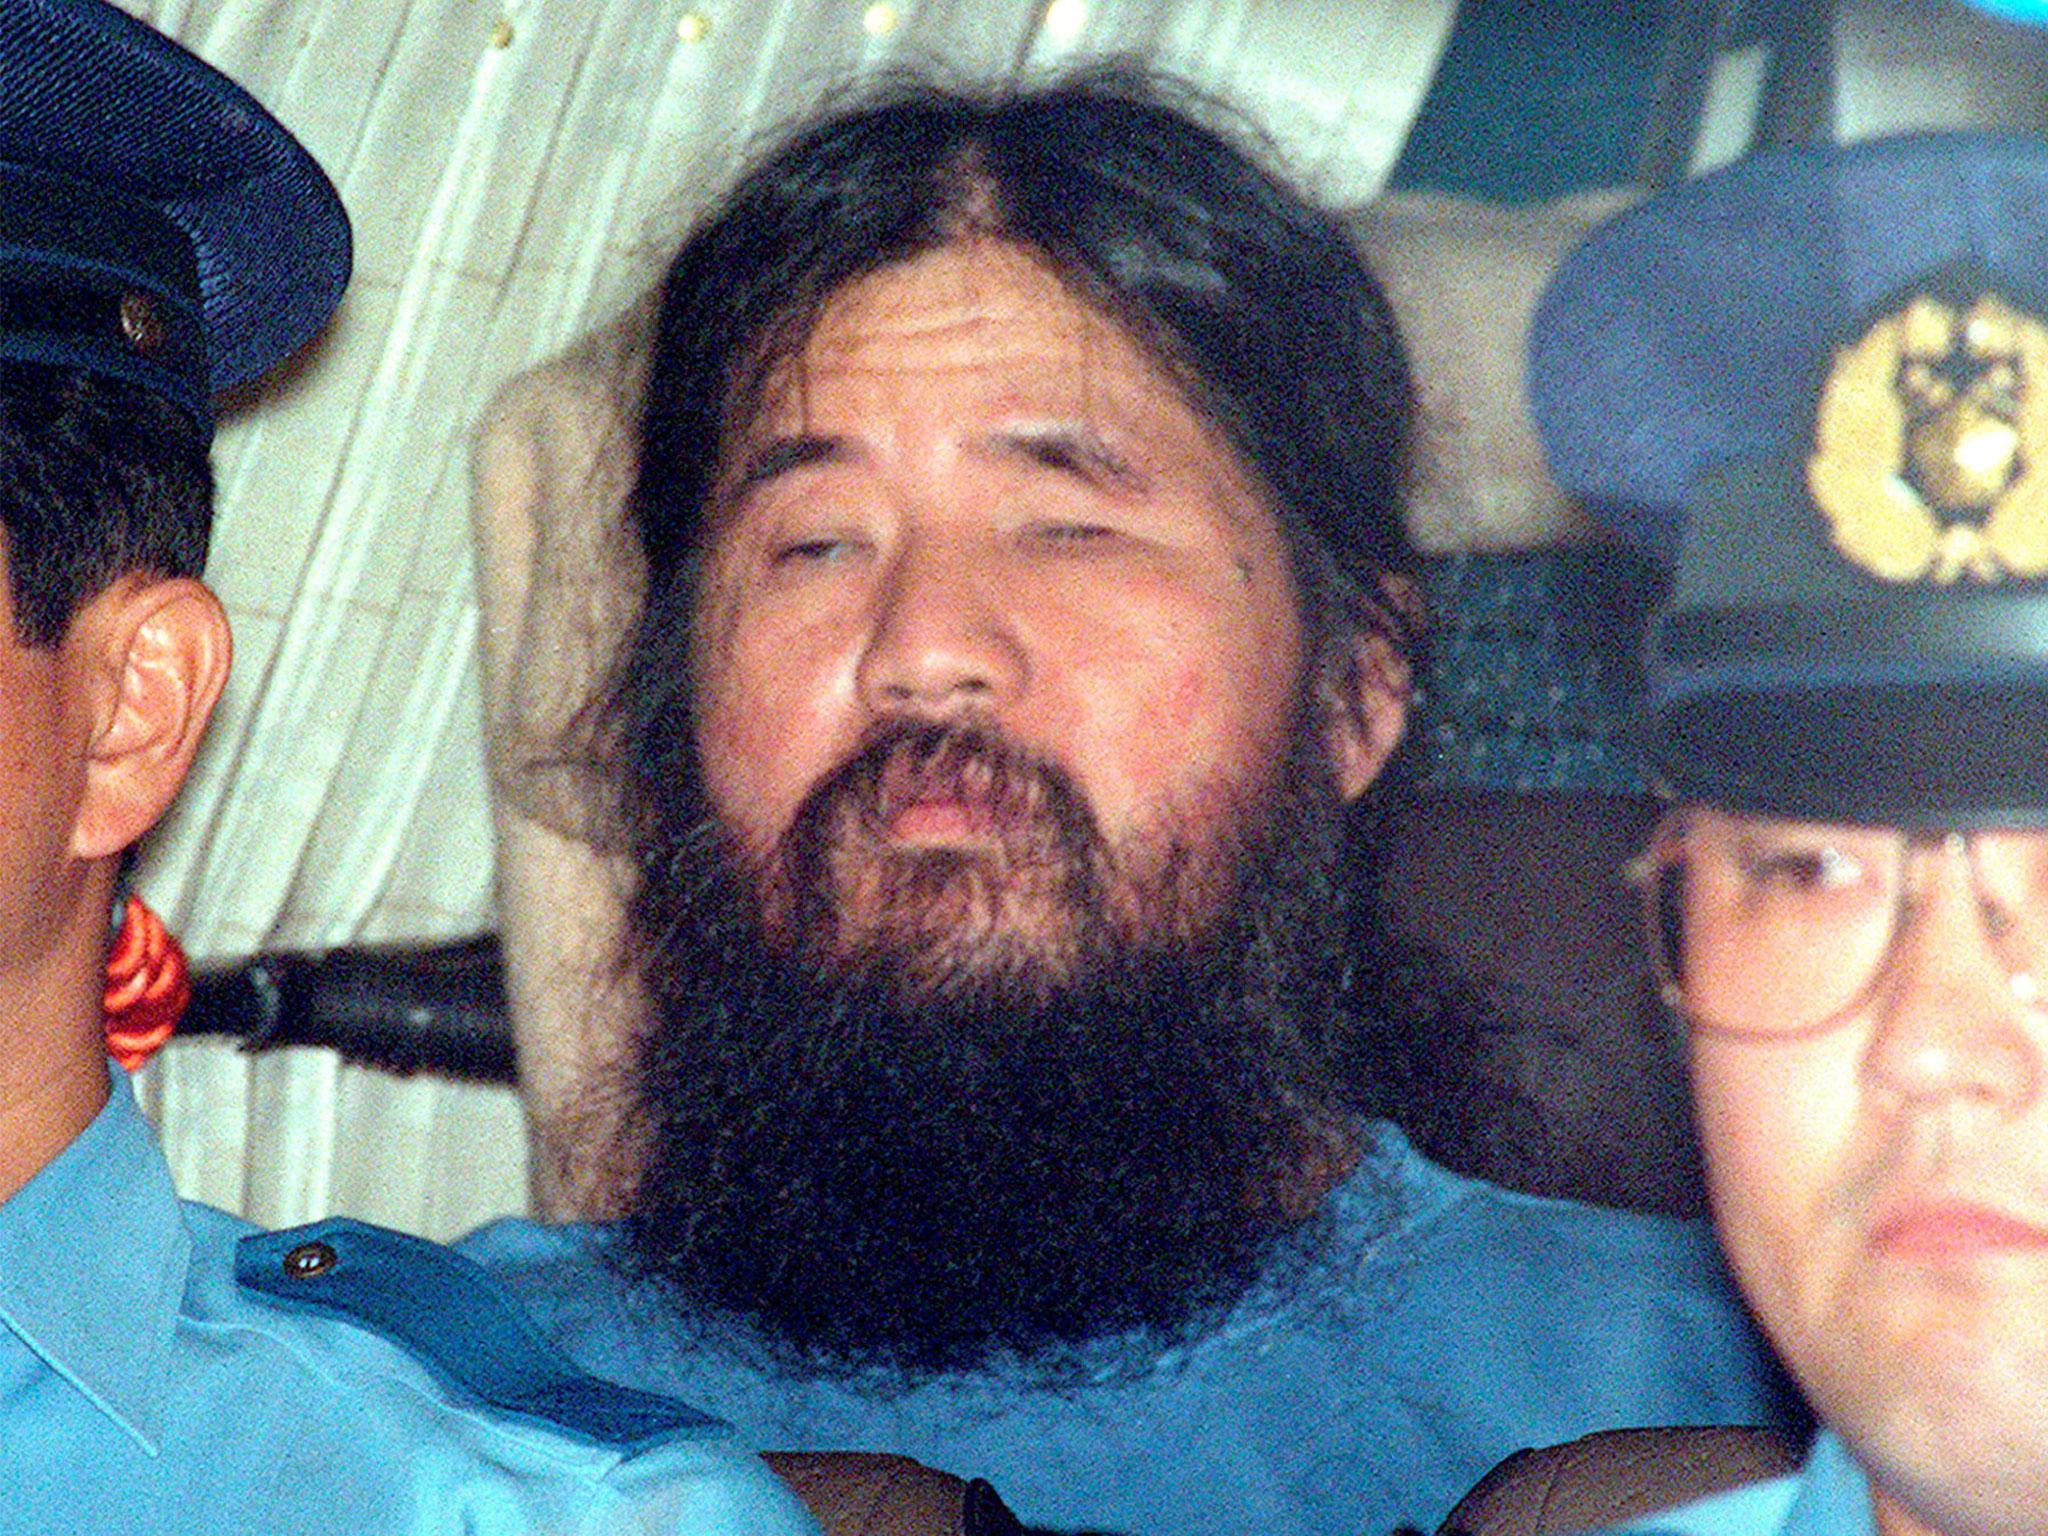 Letters containing the white powder were signed in the names of members of the Aum Shinrikyo doomsday cult, led by Shoko Asahara